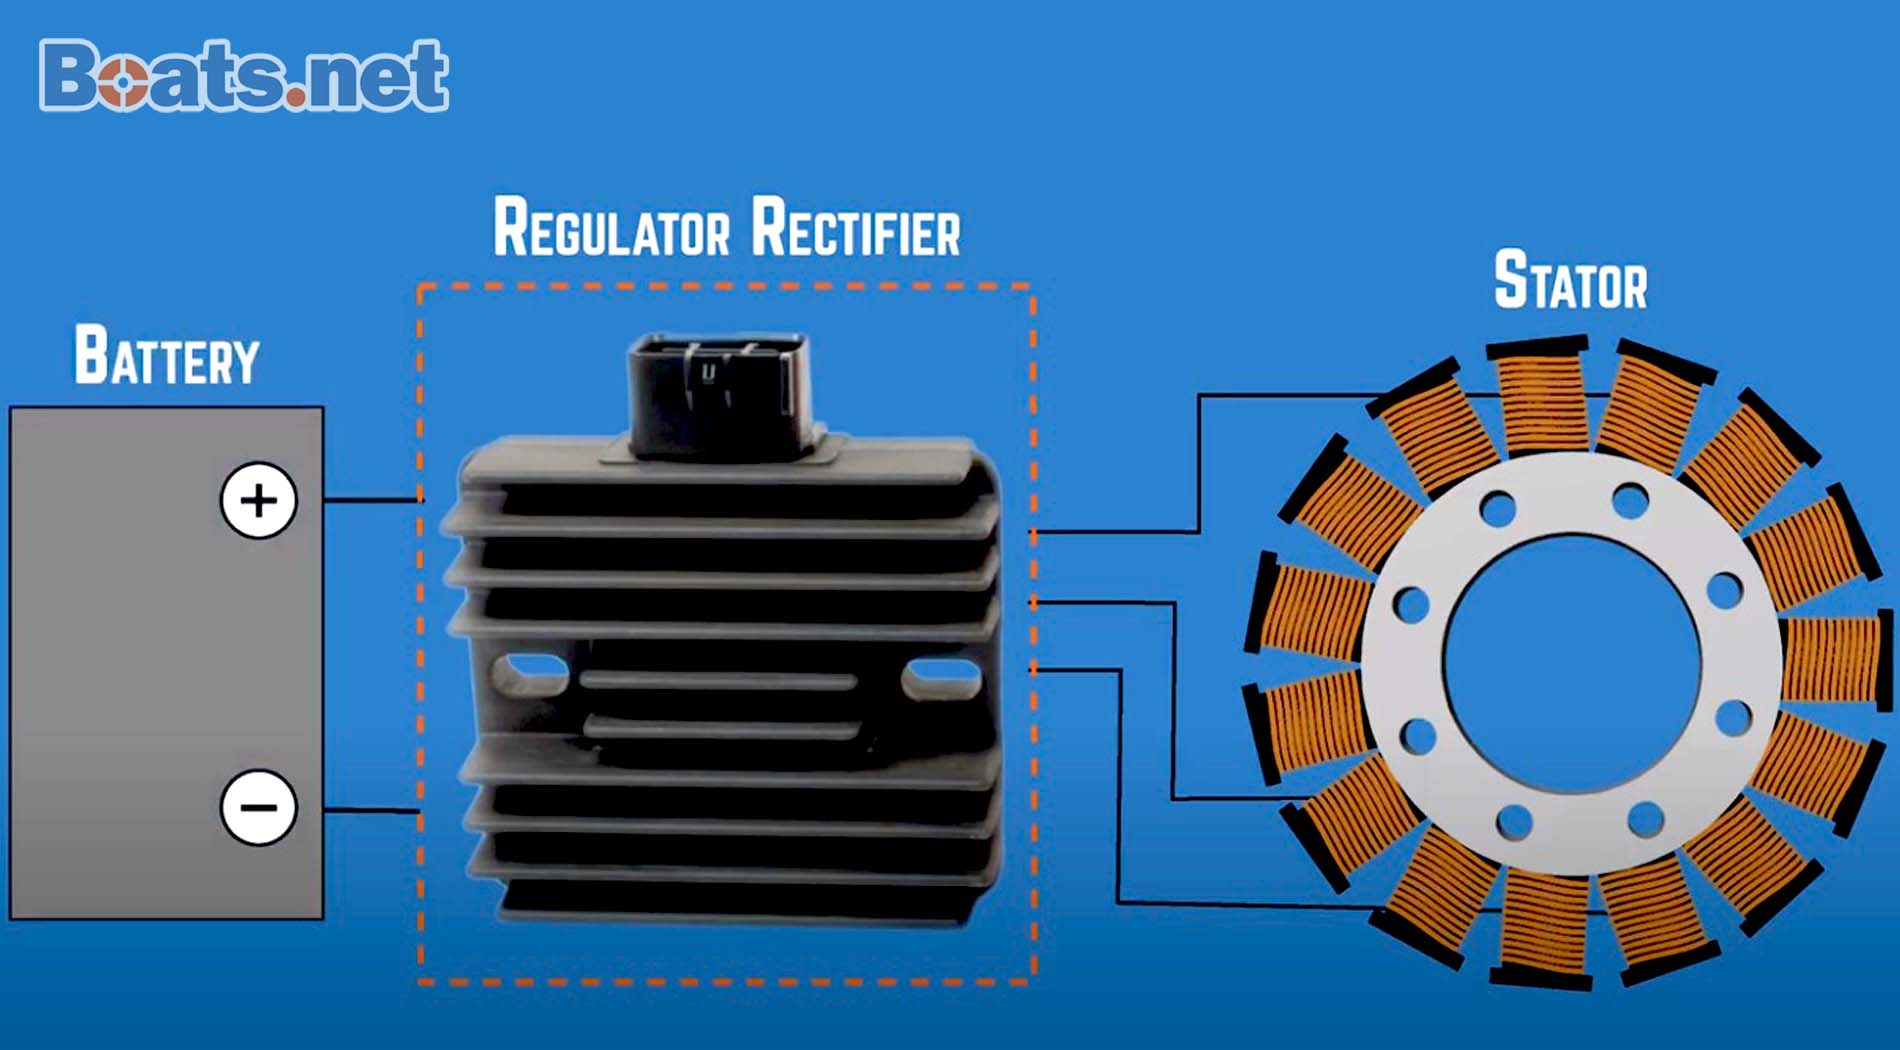 Outboard ignition system regulator rectifier